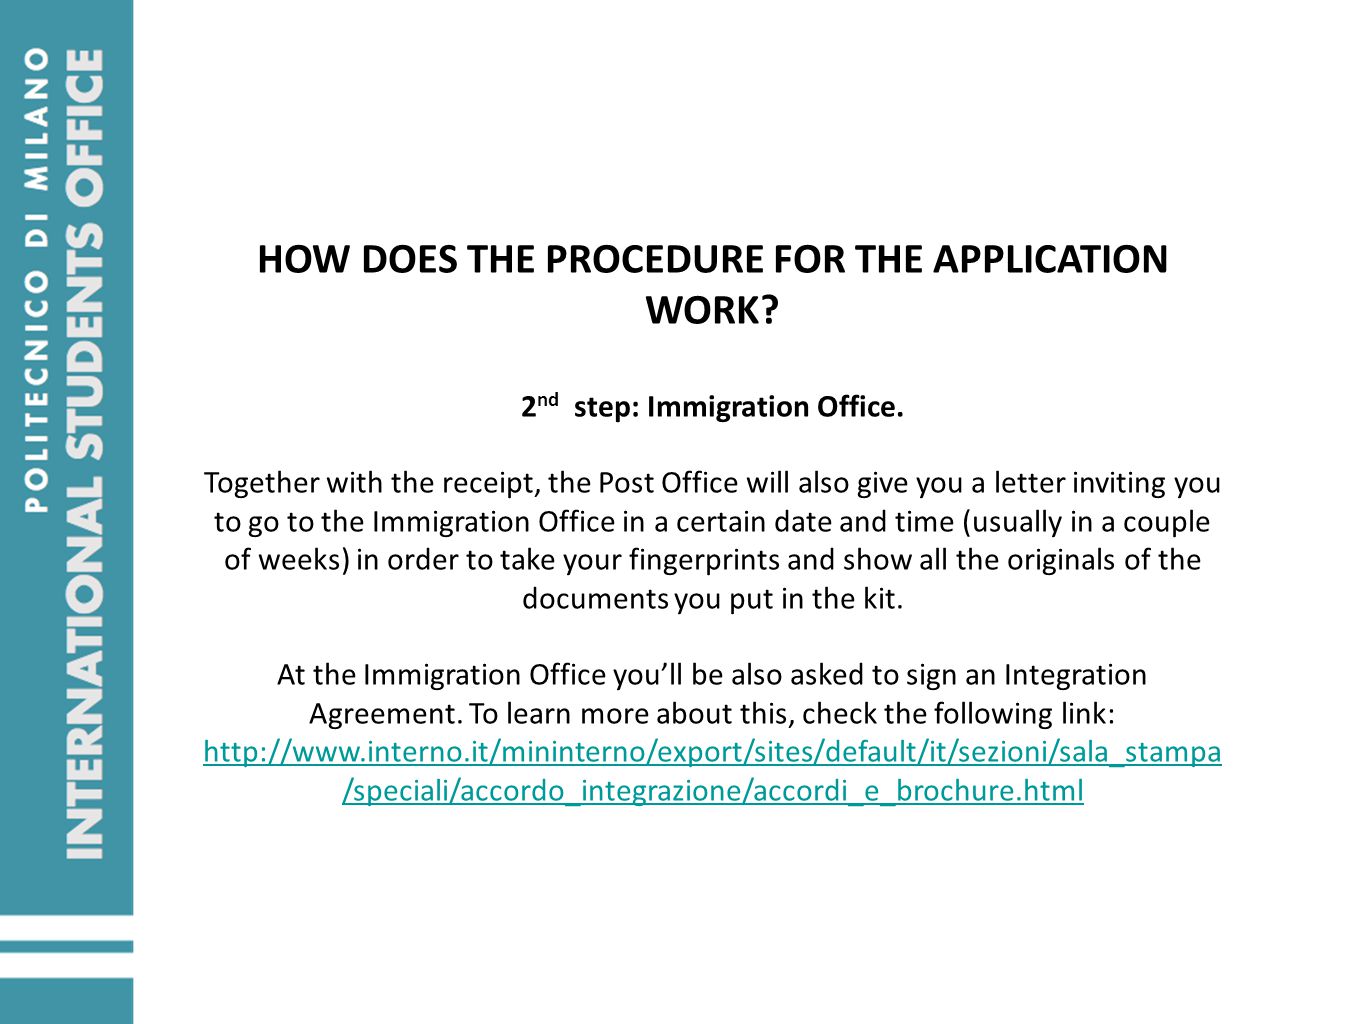 HOW DOES THE PROCEDURE FOR THE APPLICATION WORK. 2 nd step: Immigration Office.